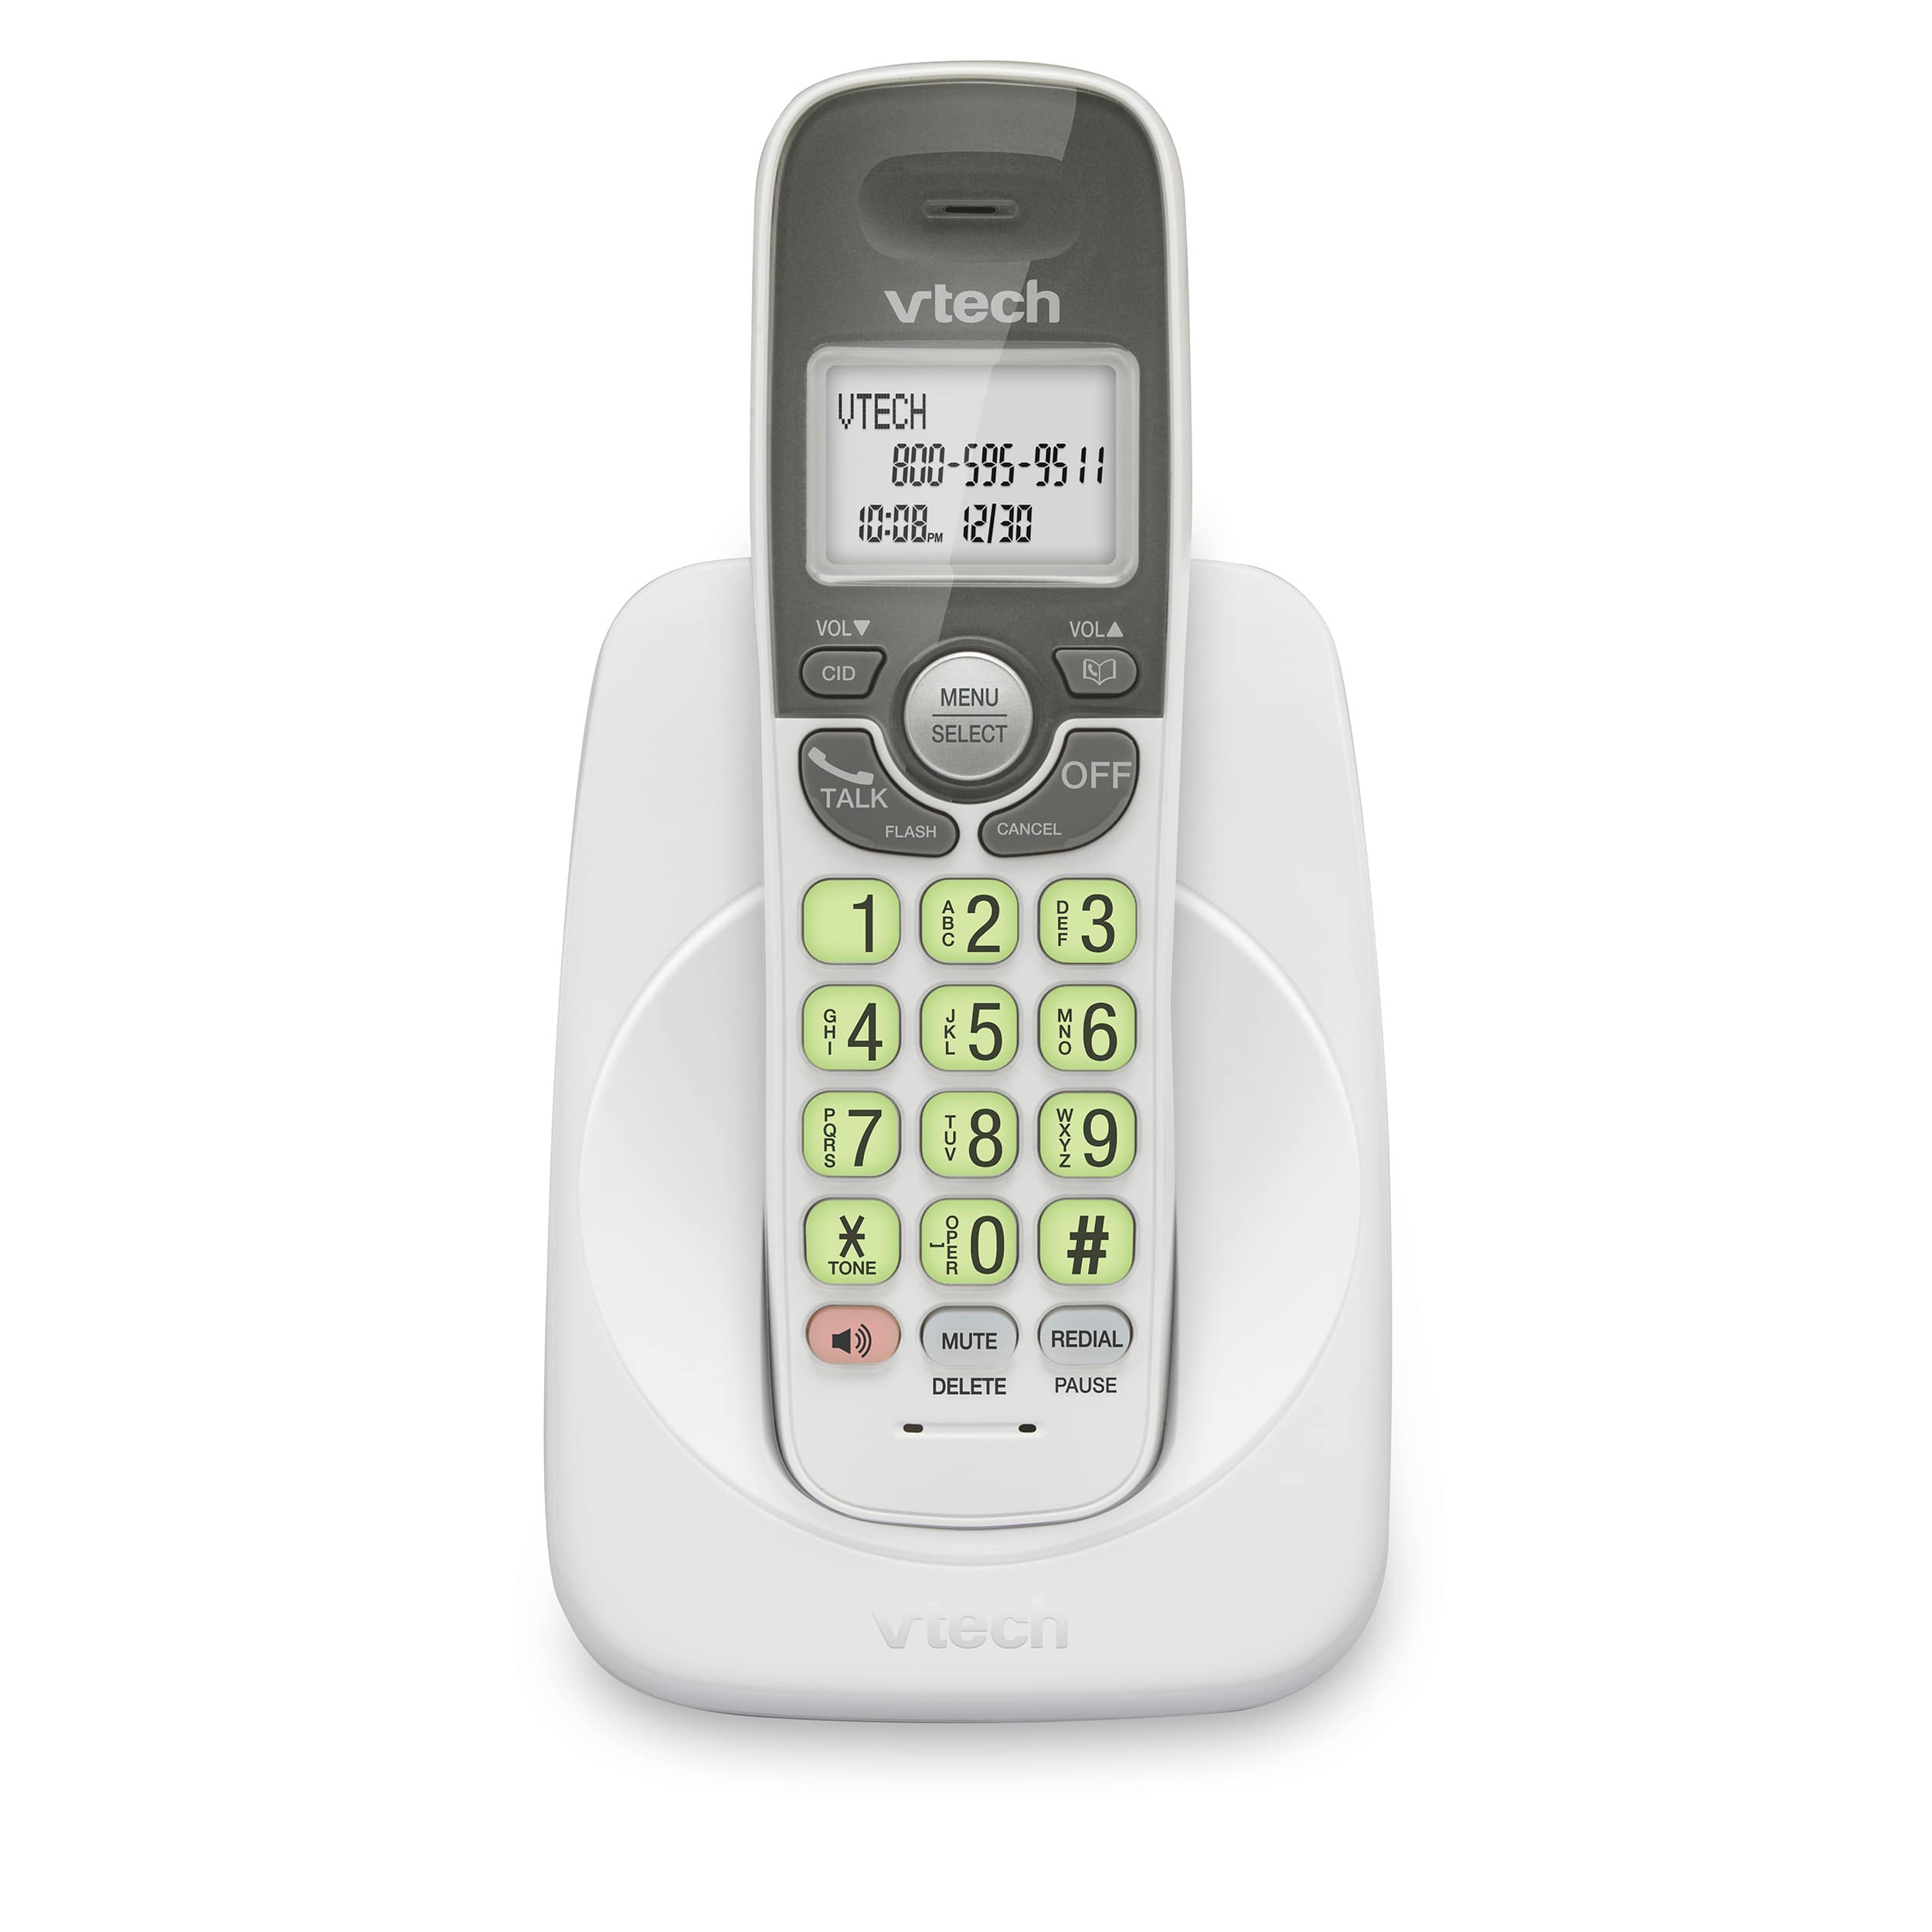 DECT 6.0 Cordless Phone with Full Duplex Speakerphone and Caller ID/Call Waiting (White) - view 1